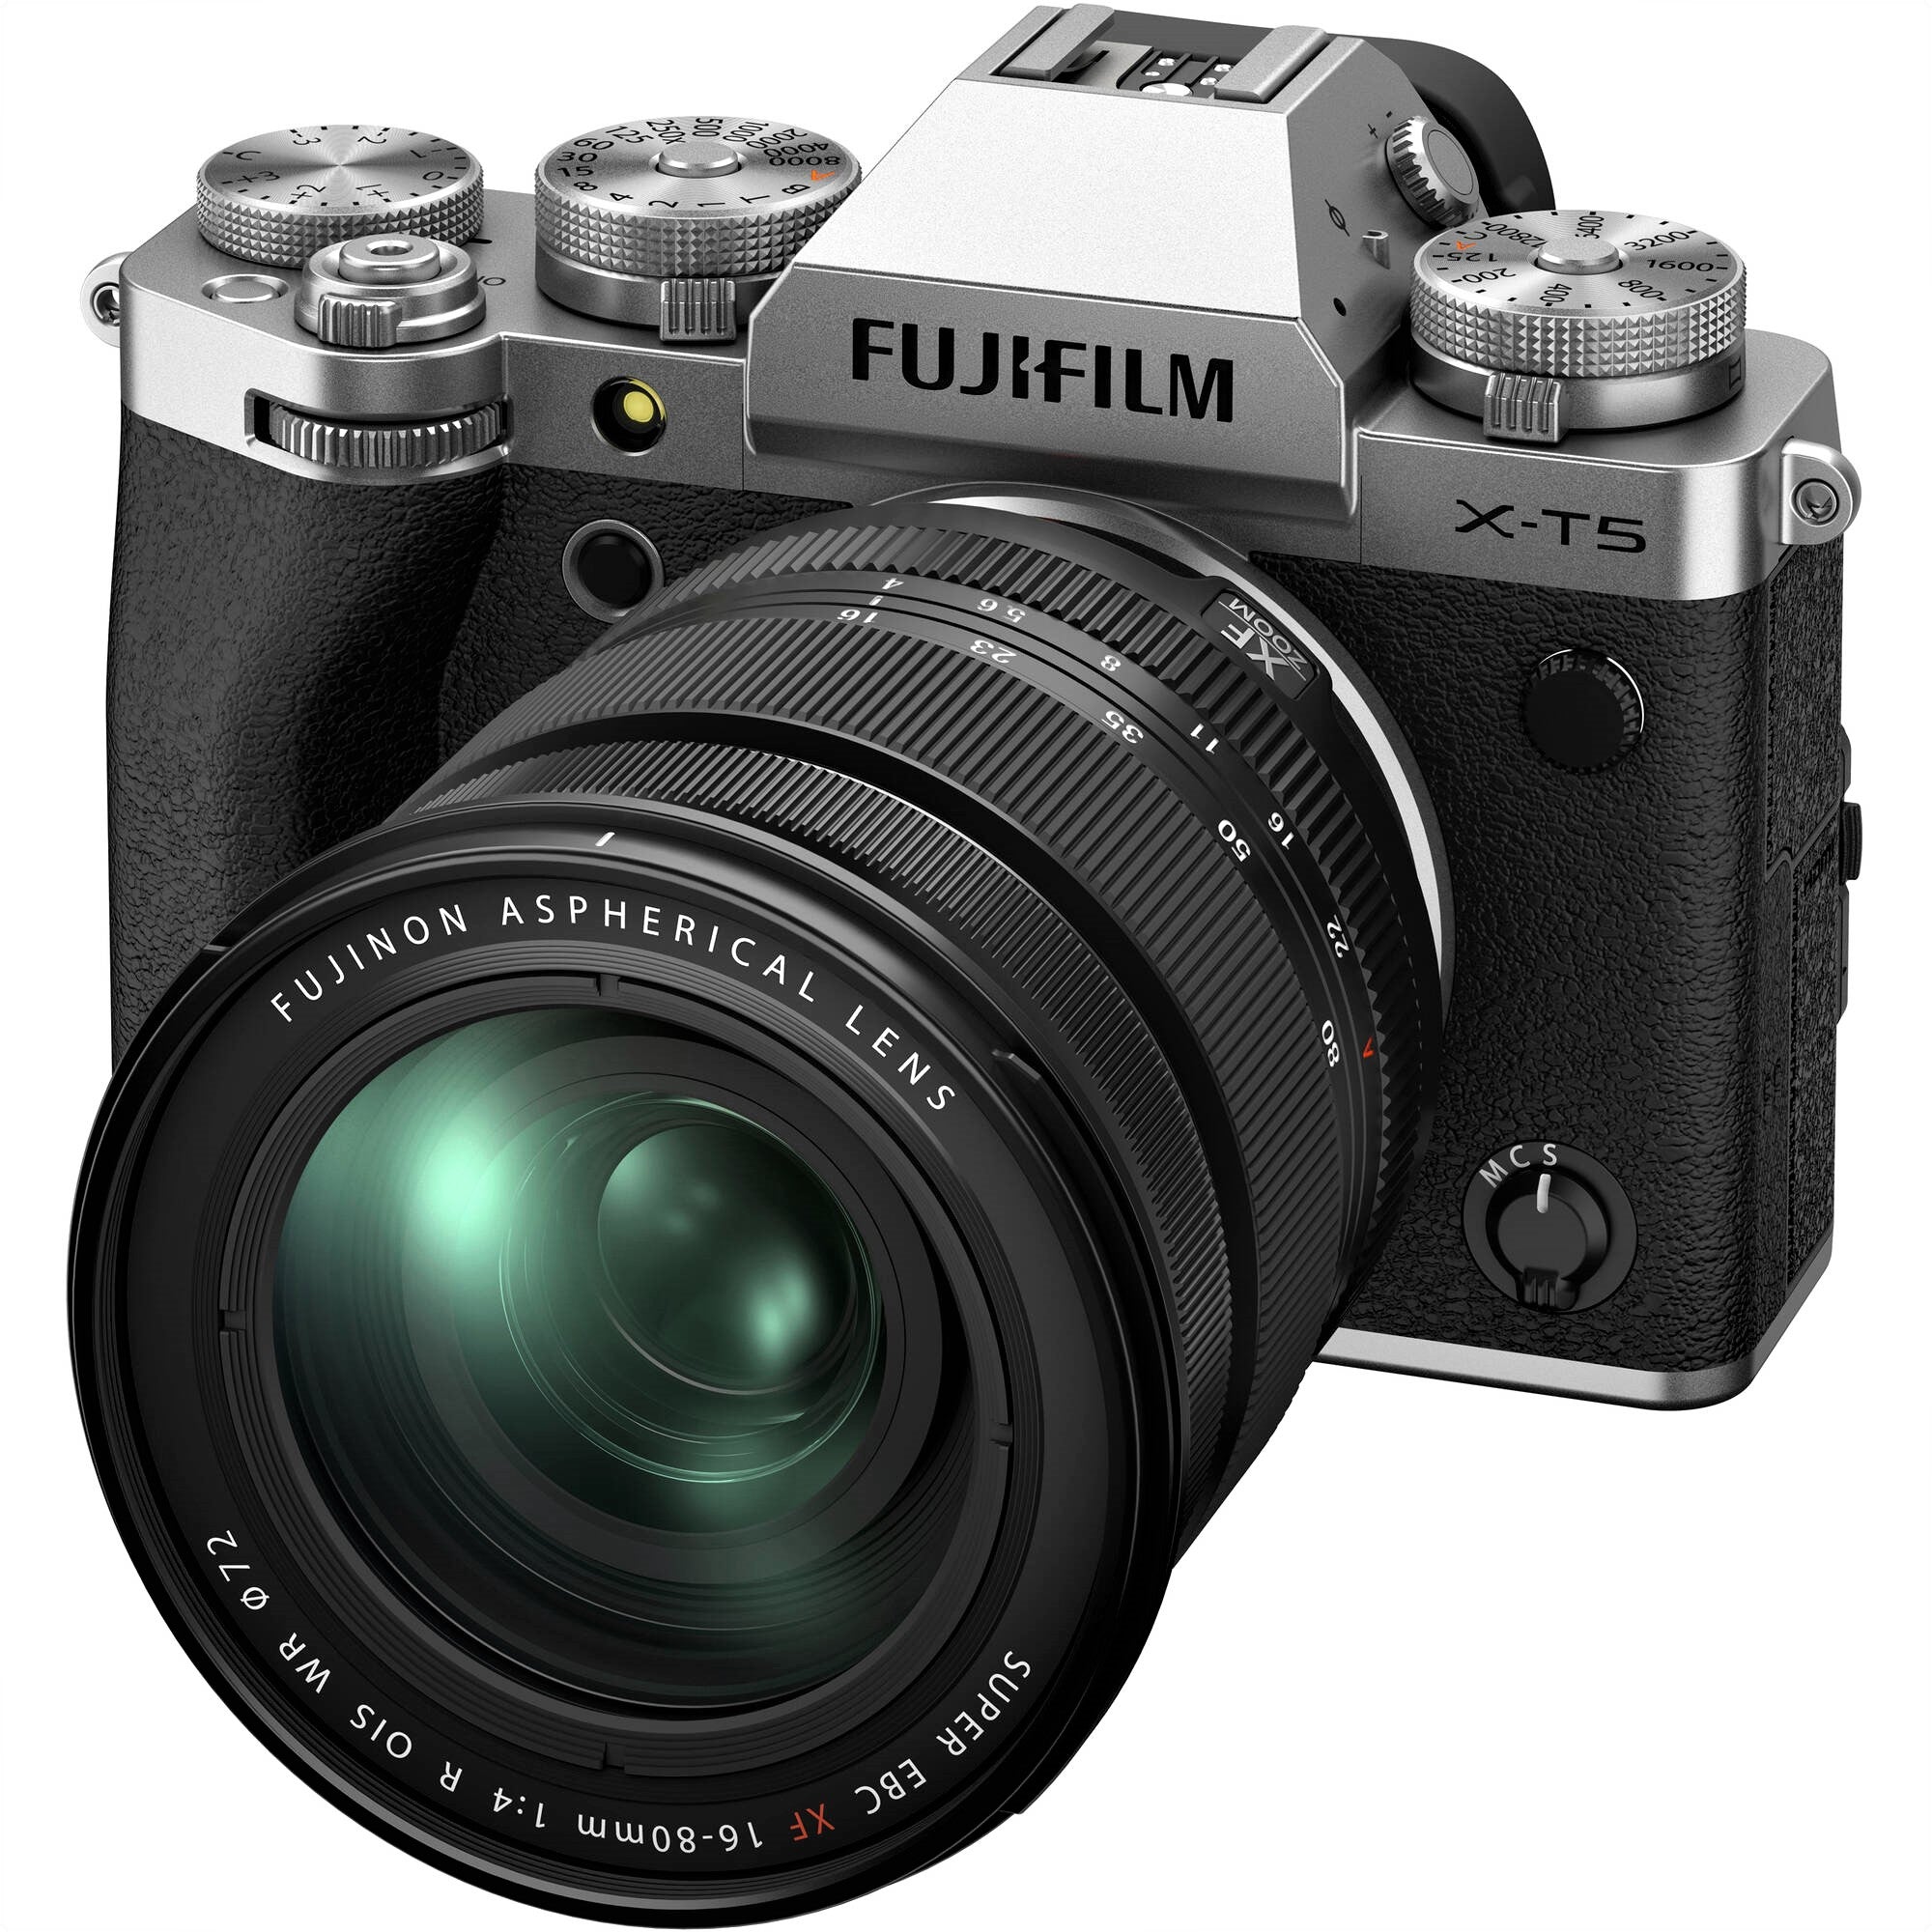 Fujifilm X-T5 Mirrorless Camera with 16-80mm Lens (Silver) - Front view